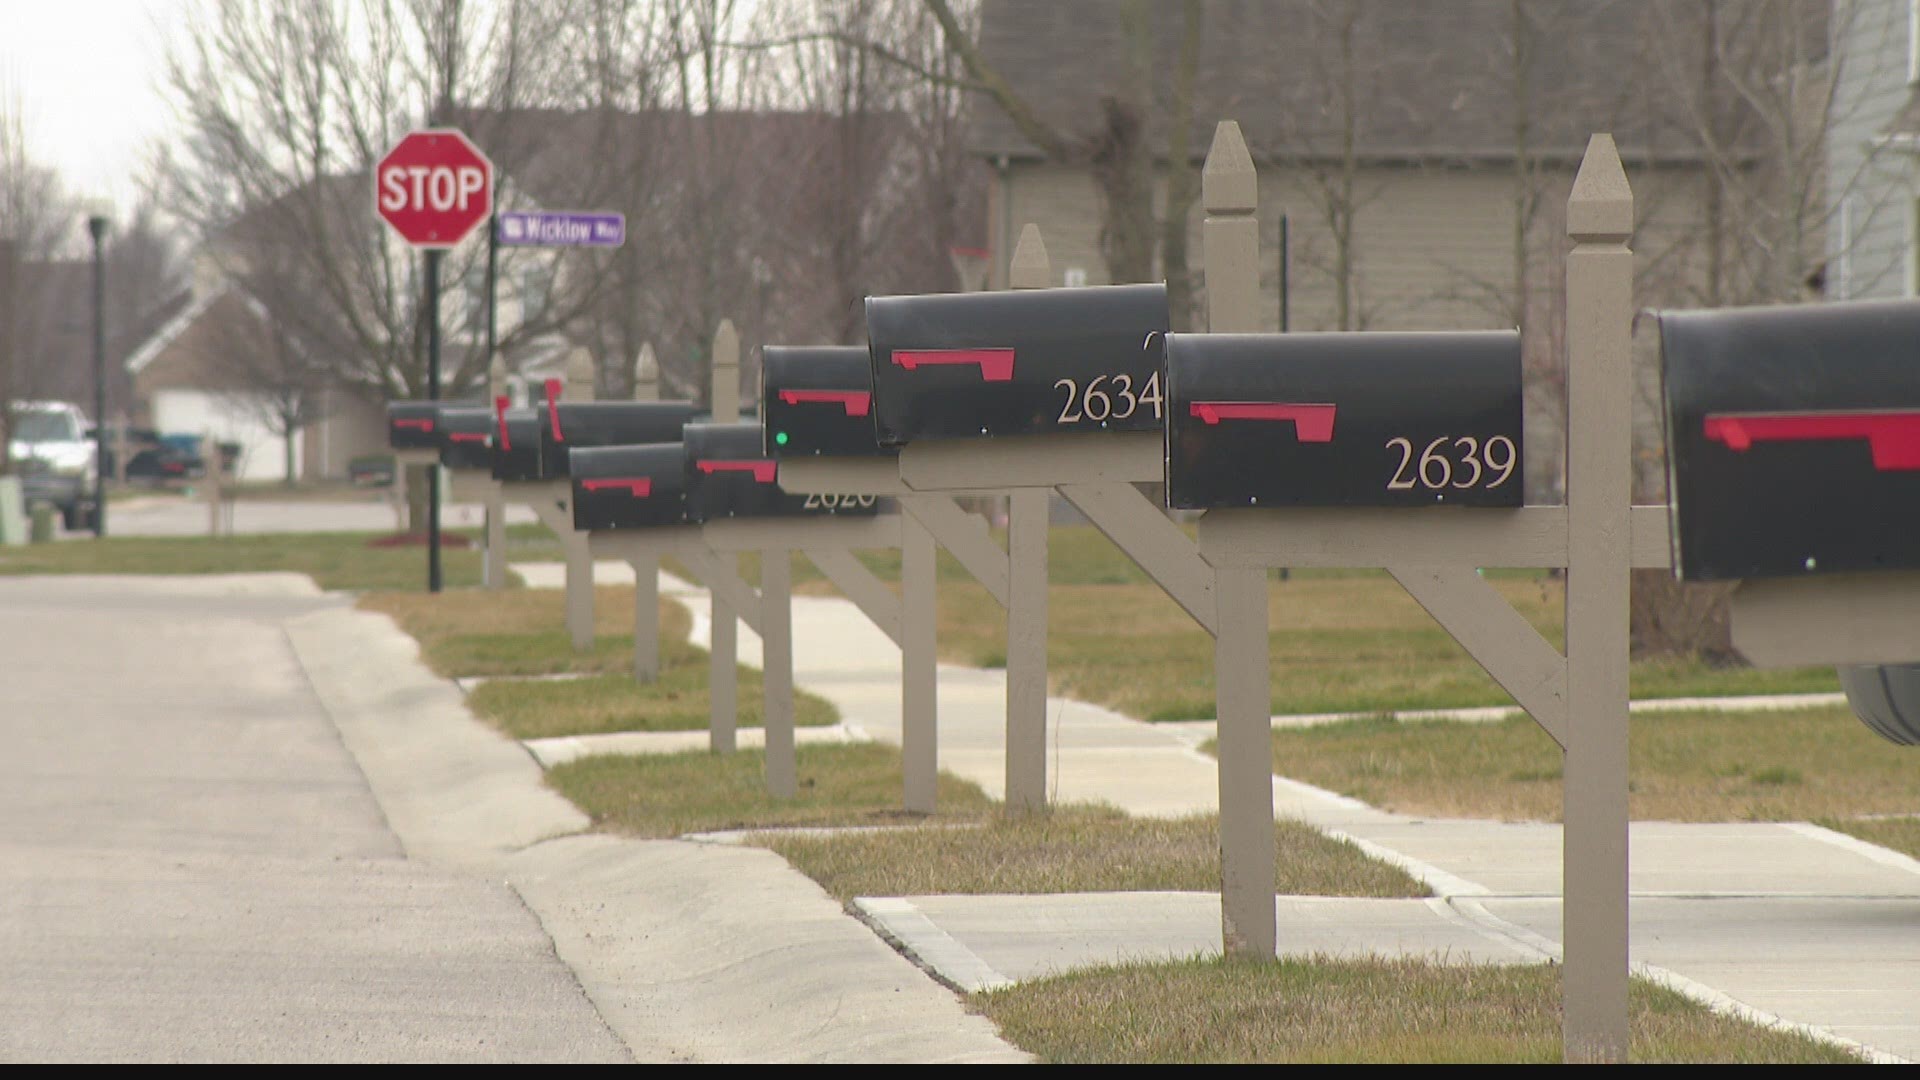 The postal service says it's happening across the country.